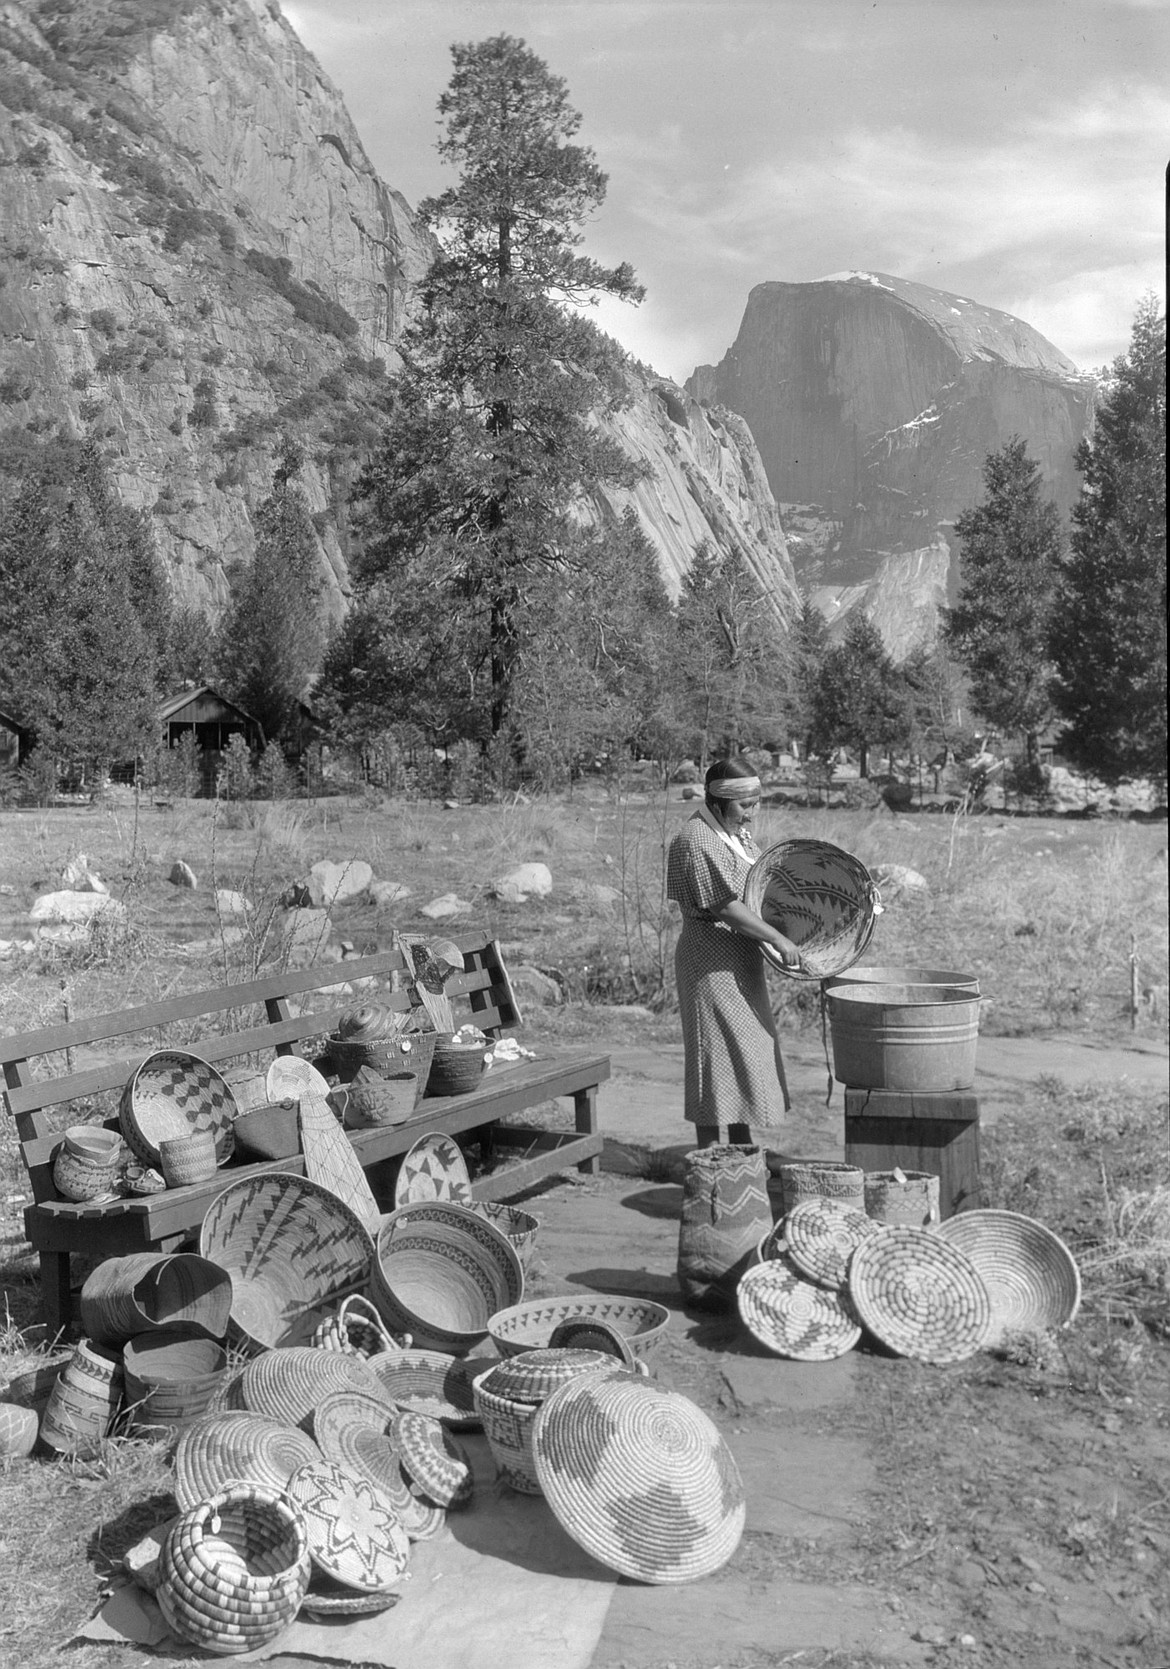 The Yosemite Indians have long been highly creative basket makers.